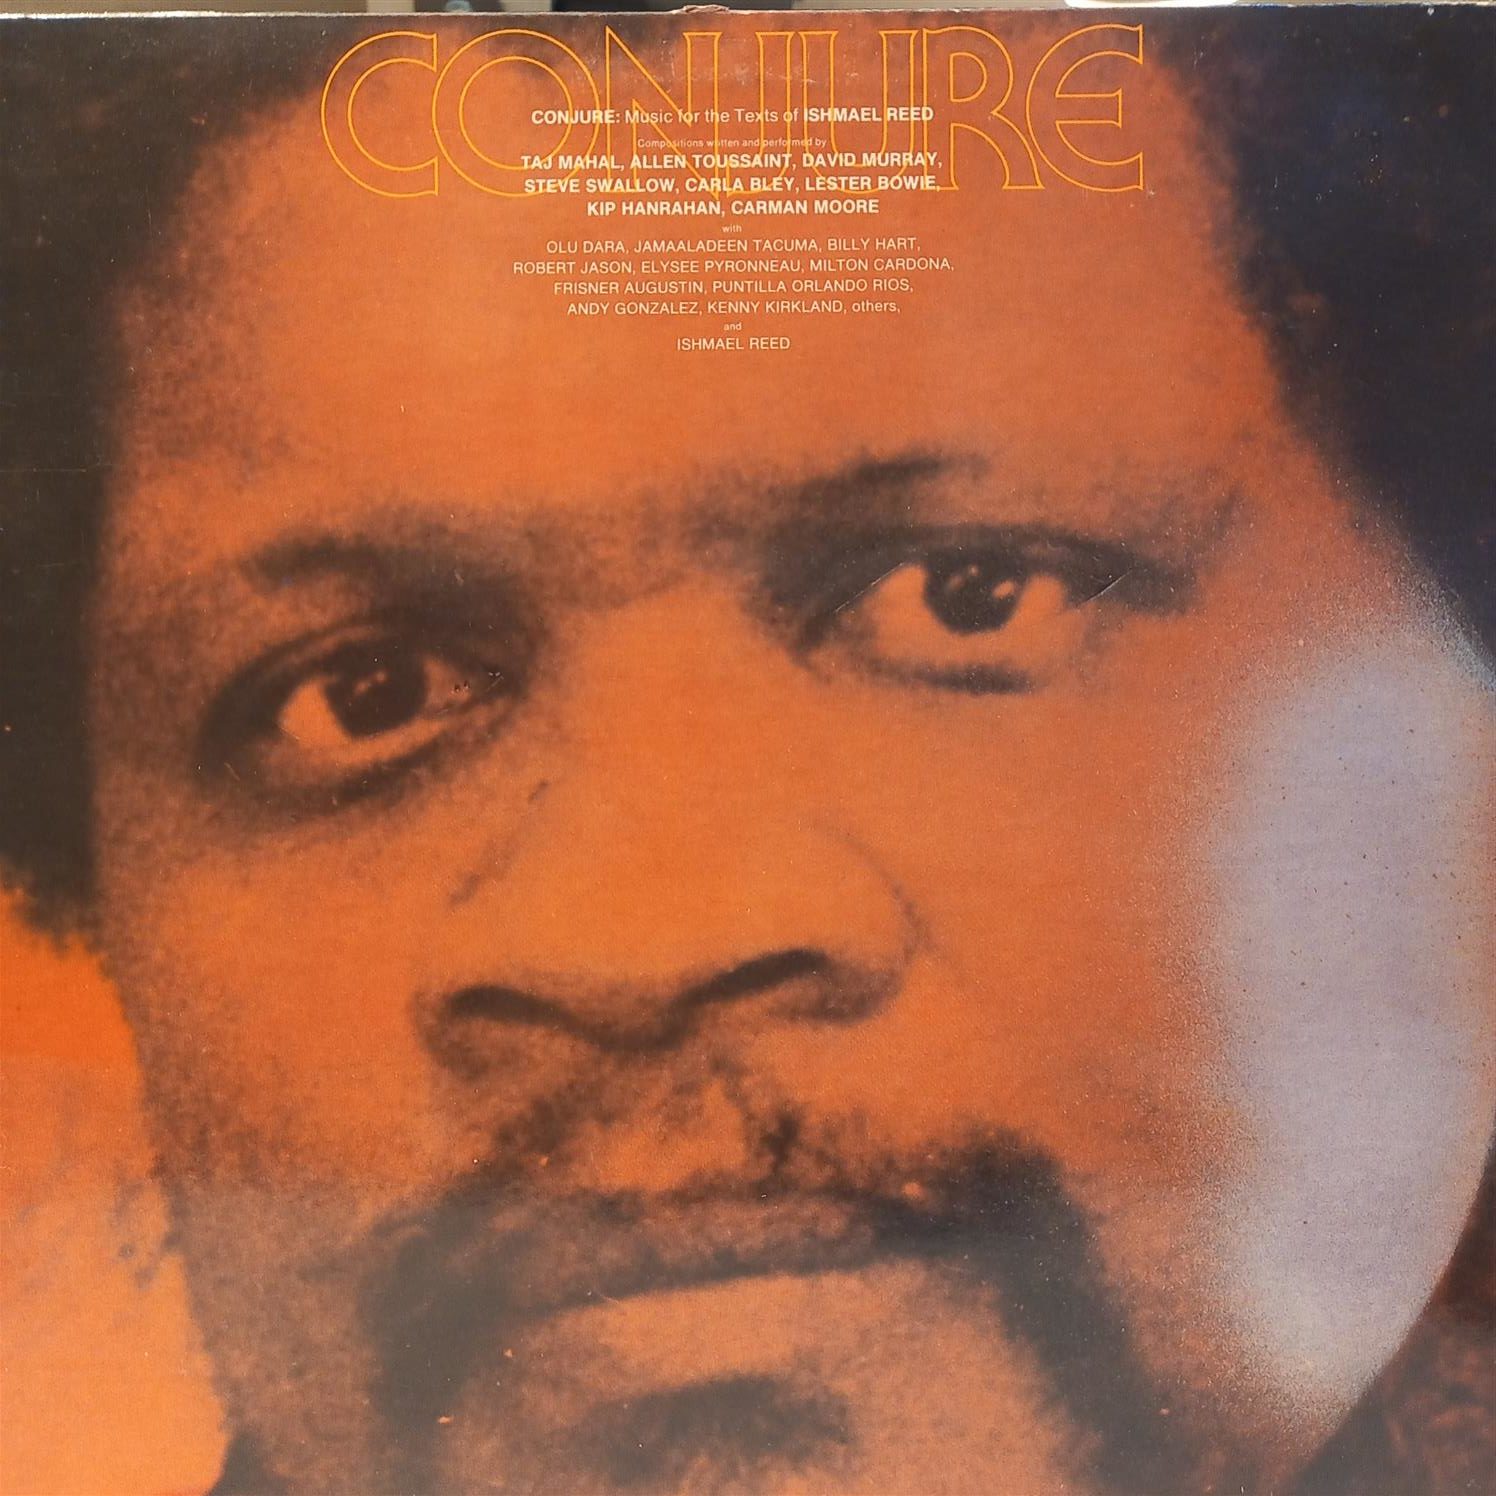 CONJURE – MUSIC FOR THE TEXTS OF ISHMAEL REED ON